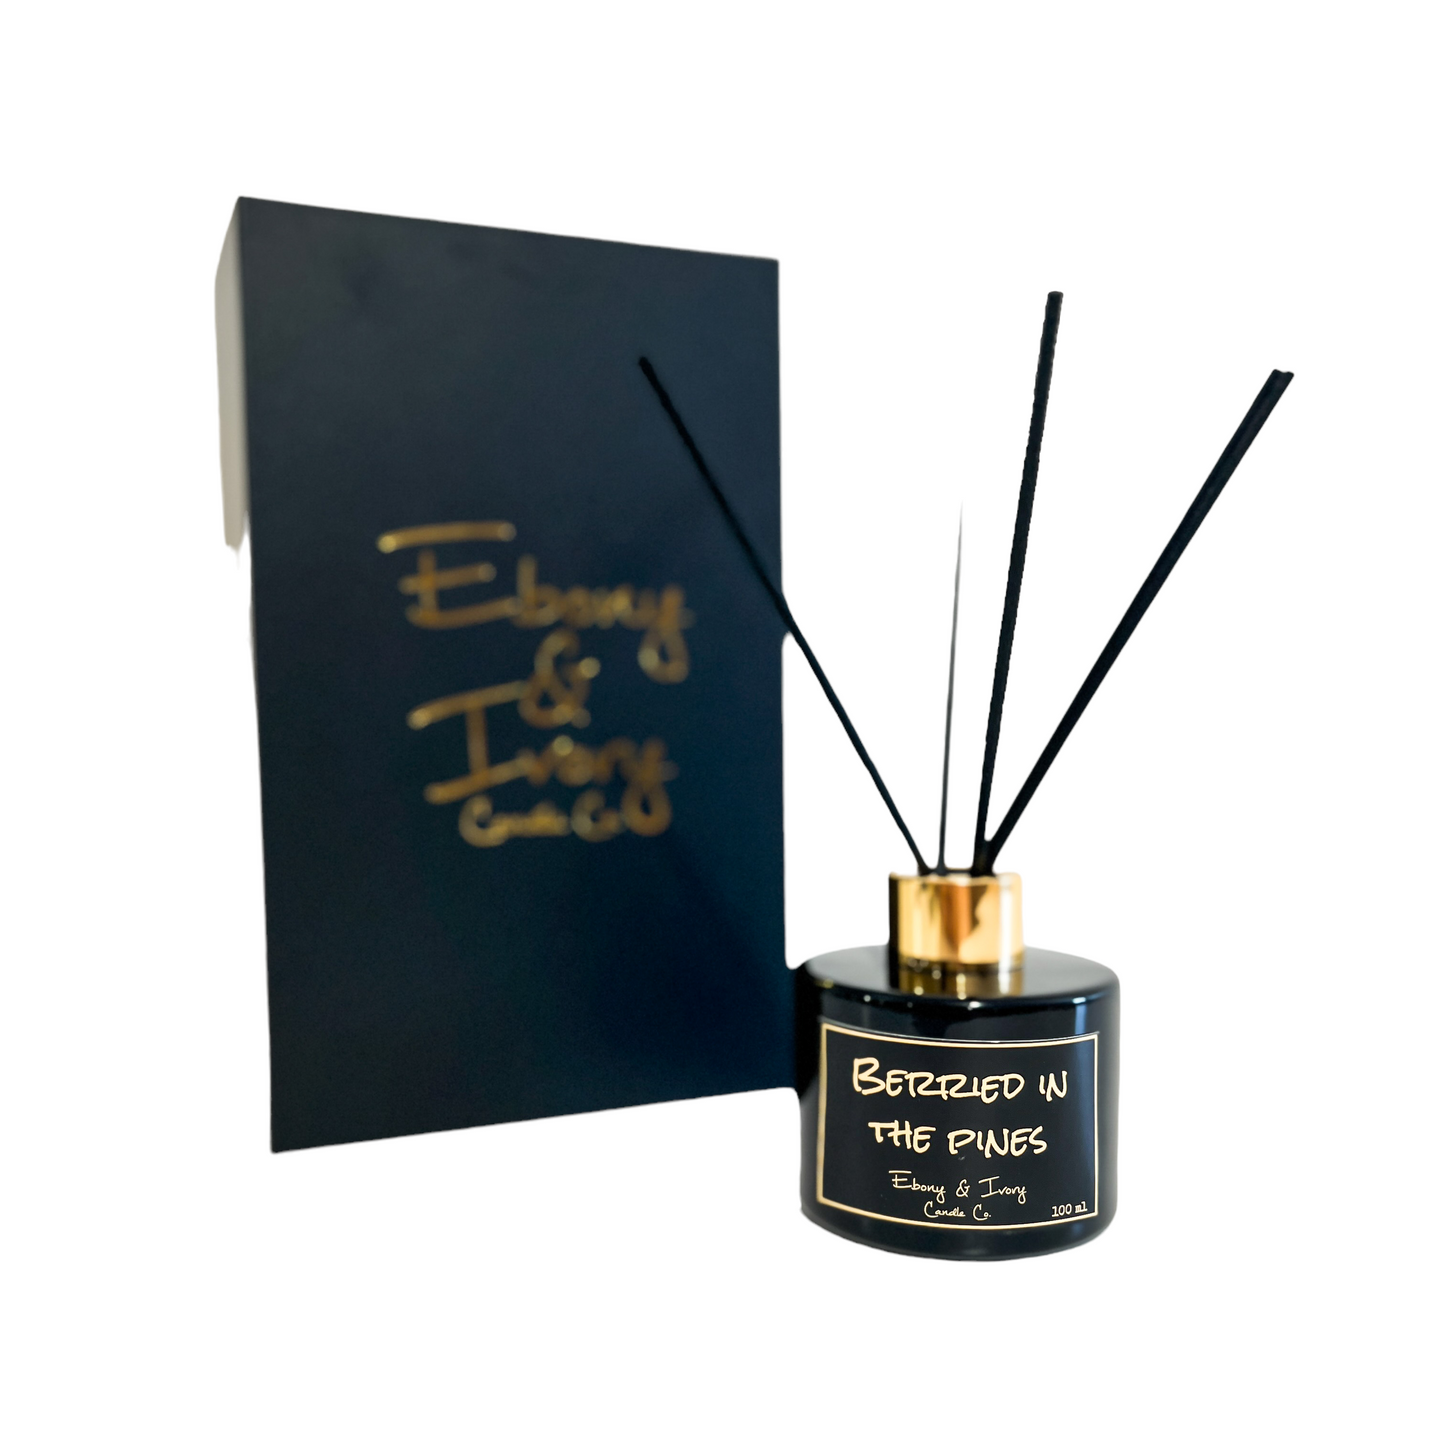 Black one hundred milliliters, blue spruce and huckleberry scented reed diffuser with a gold lid and a black label that reads Berried in the Pines